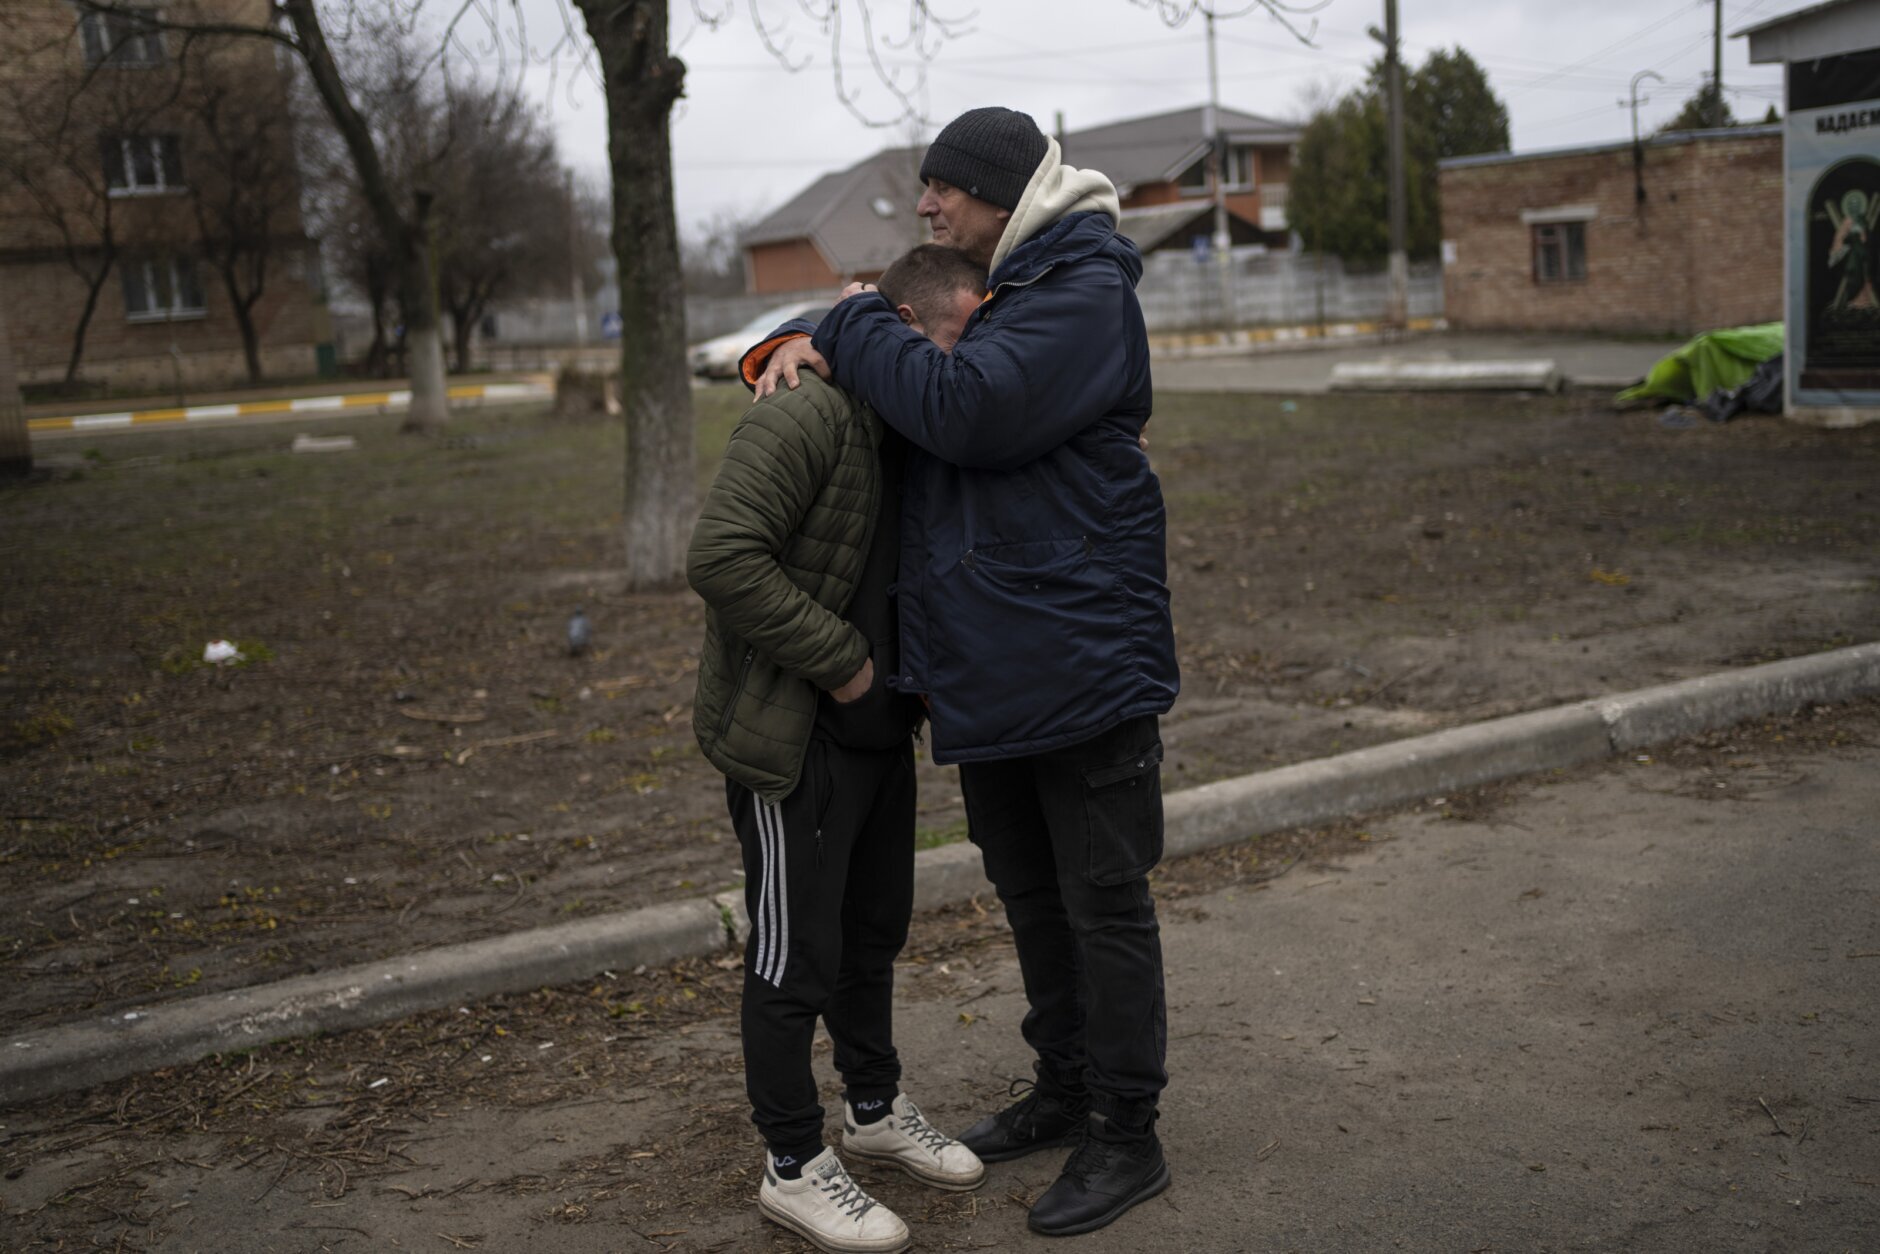 The father and a friend of Anatoliy Kolesnikov, 30, who was killed by Russian soldiers in his car trying to evacuate from Irpin, mourns his death while waiting outside the morgue in Bucha, in the outskirts of Kyiv, Ukraine, Wednesday , April 13, 2022. (AP Photo/Rodrigo Abd)